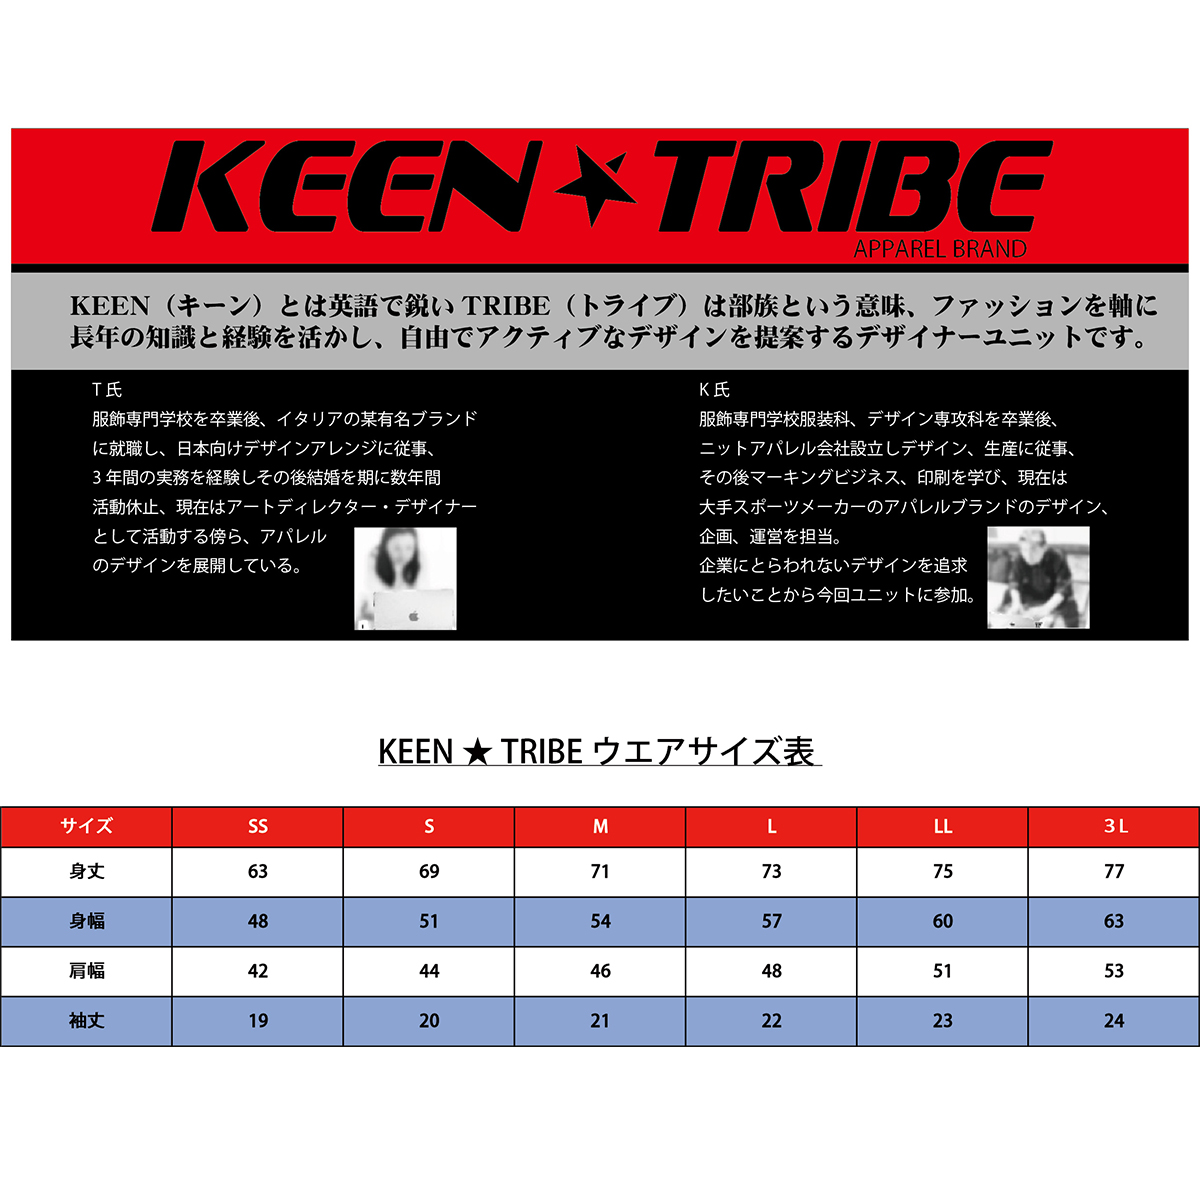 KEEN ★ TRIBE　KT-21(受注生産)